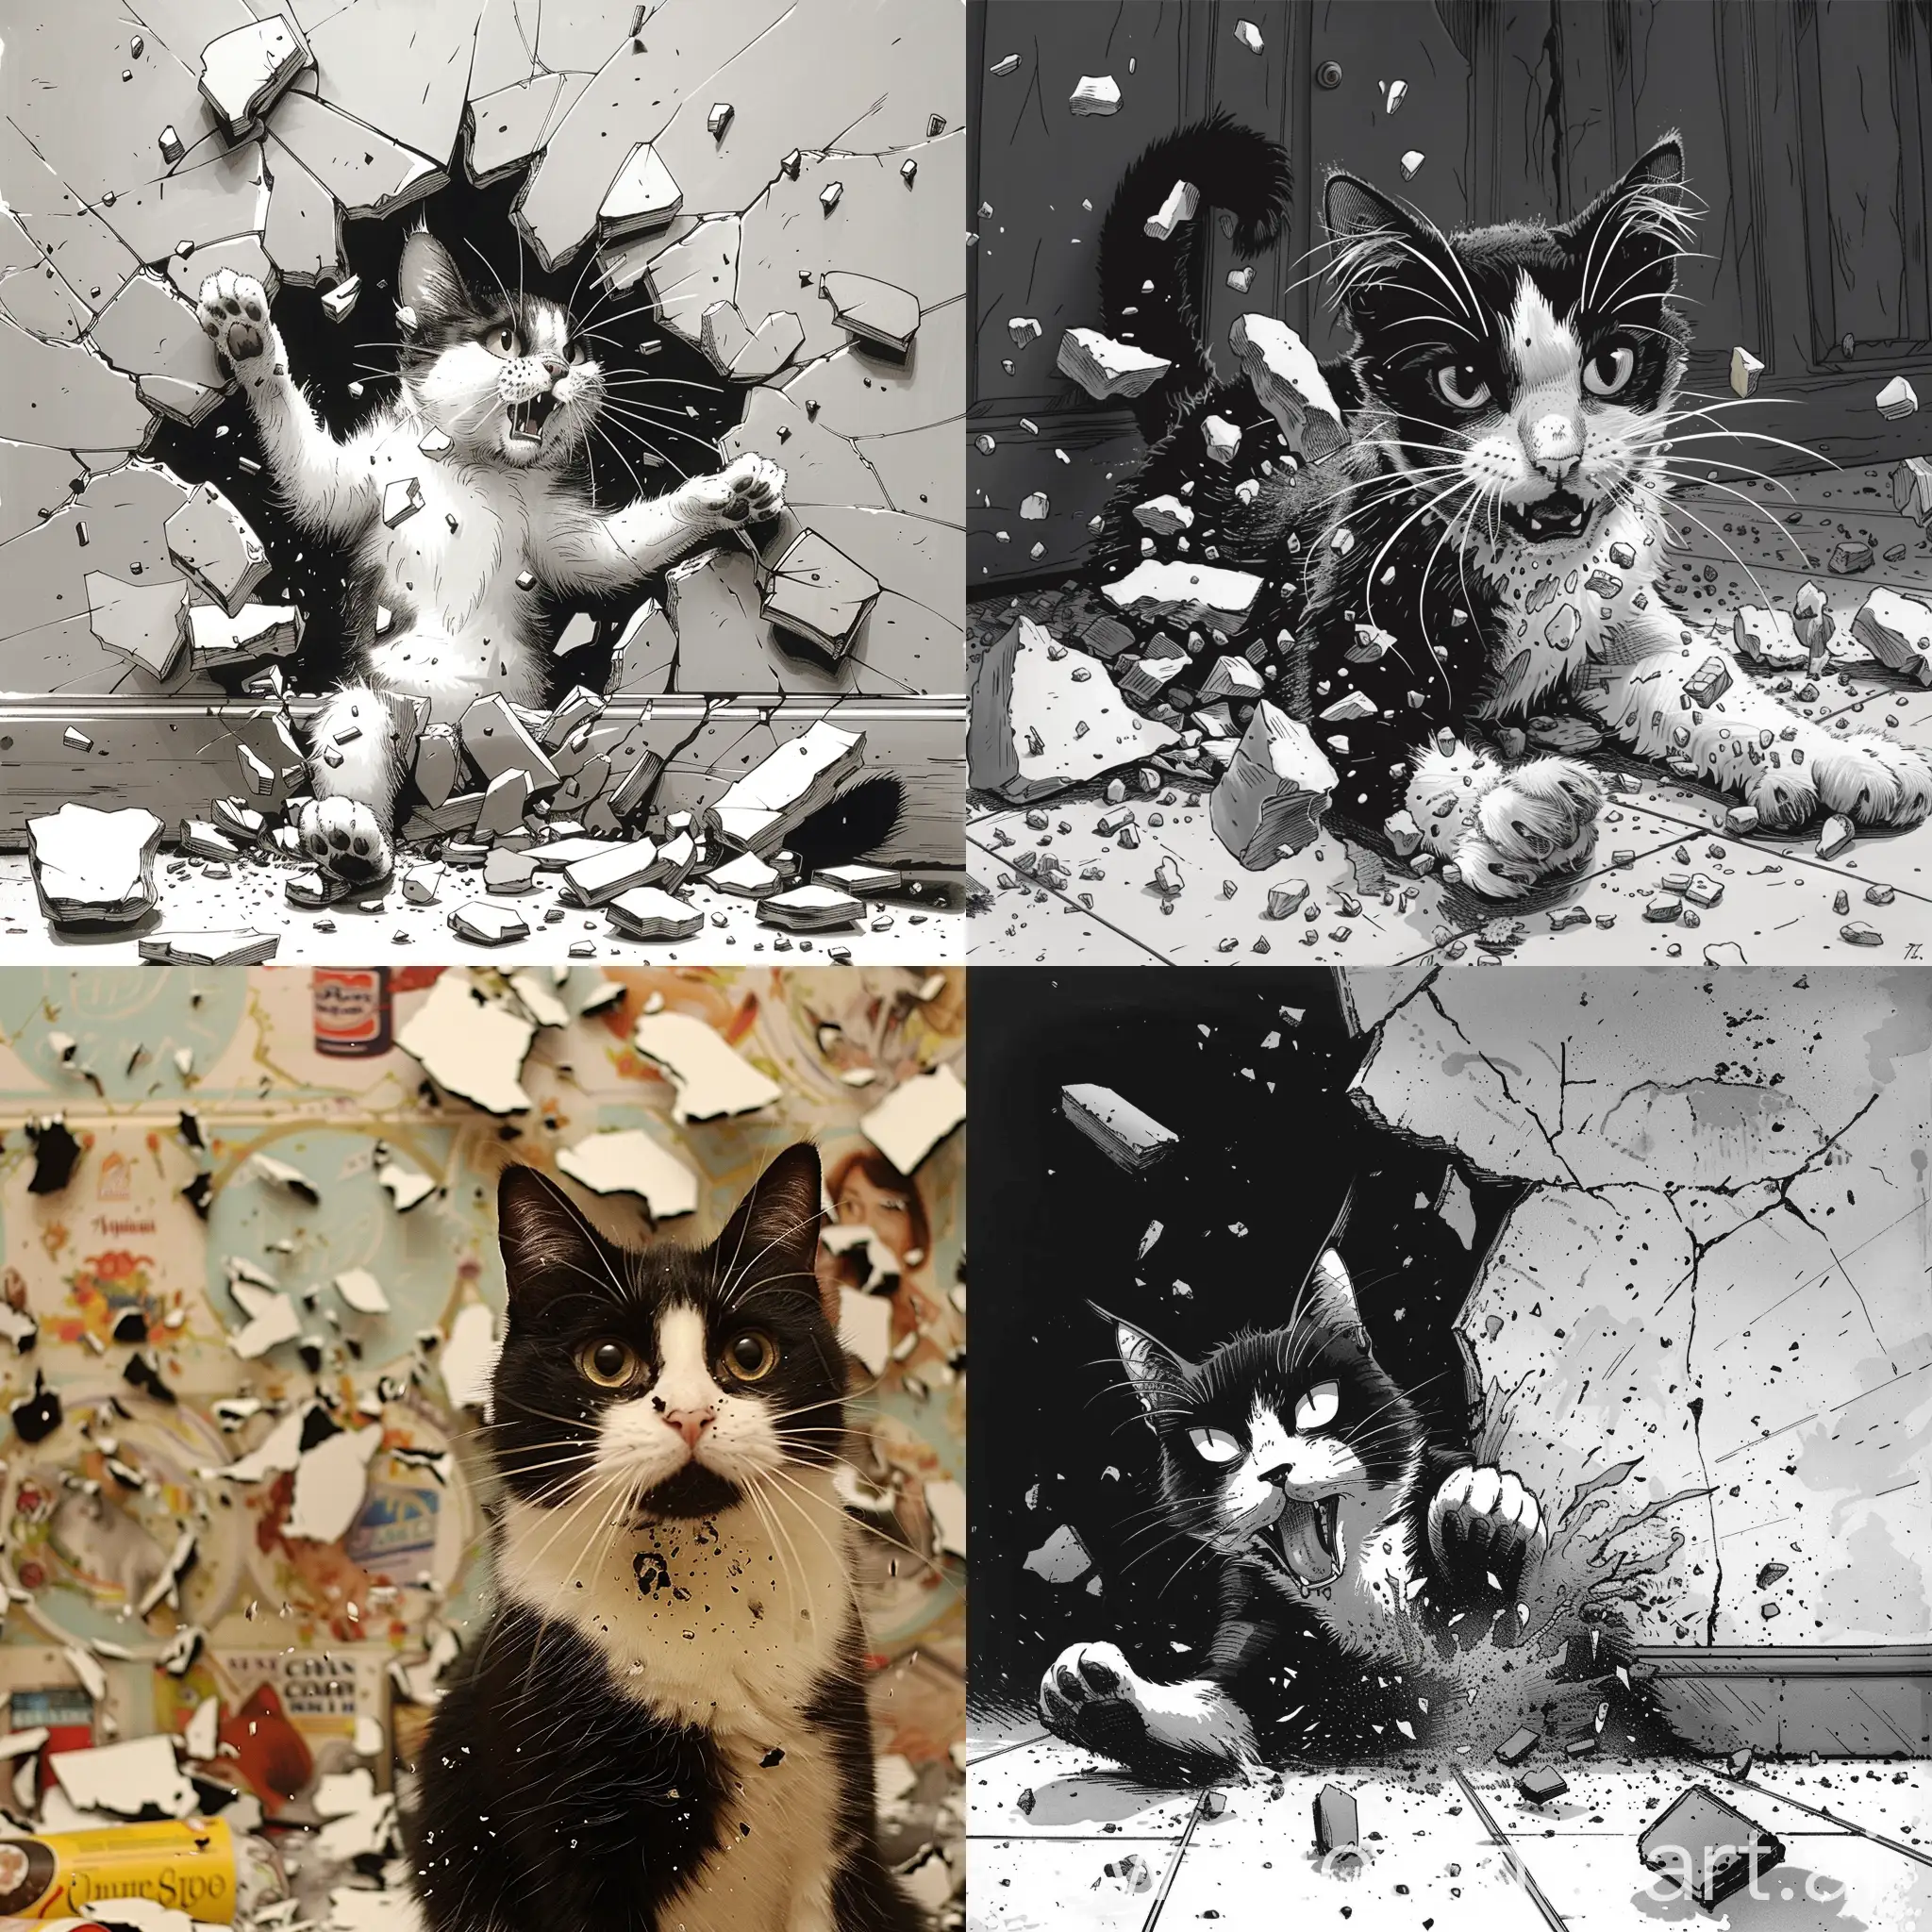 Playful-Cat-Playfully-Ripping-Wallpaper-in-Comic-Black-and-White-Scene